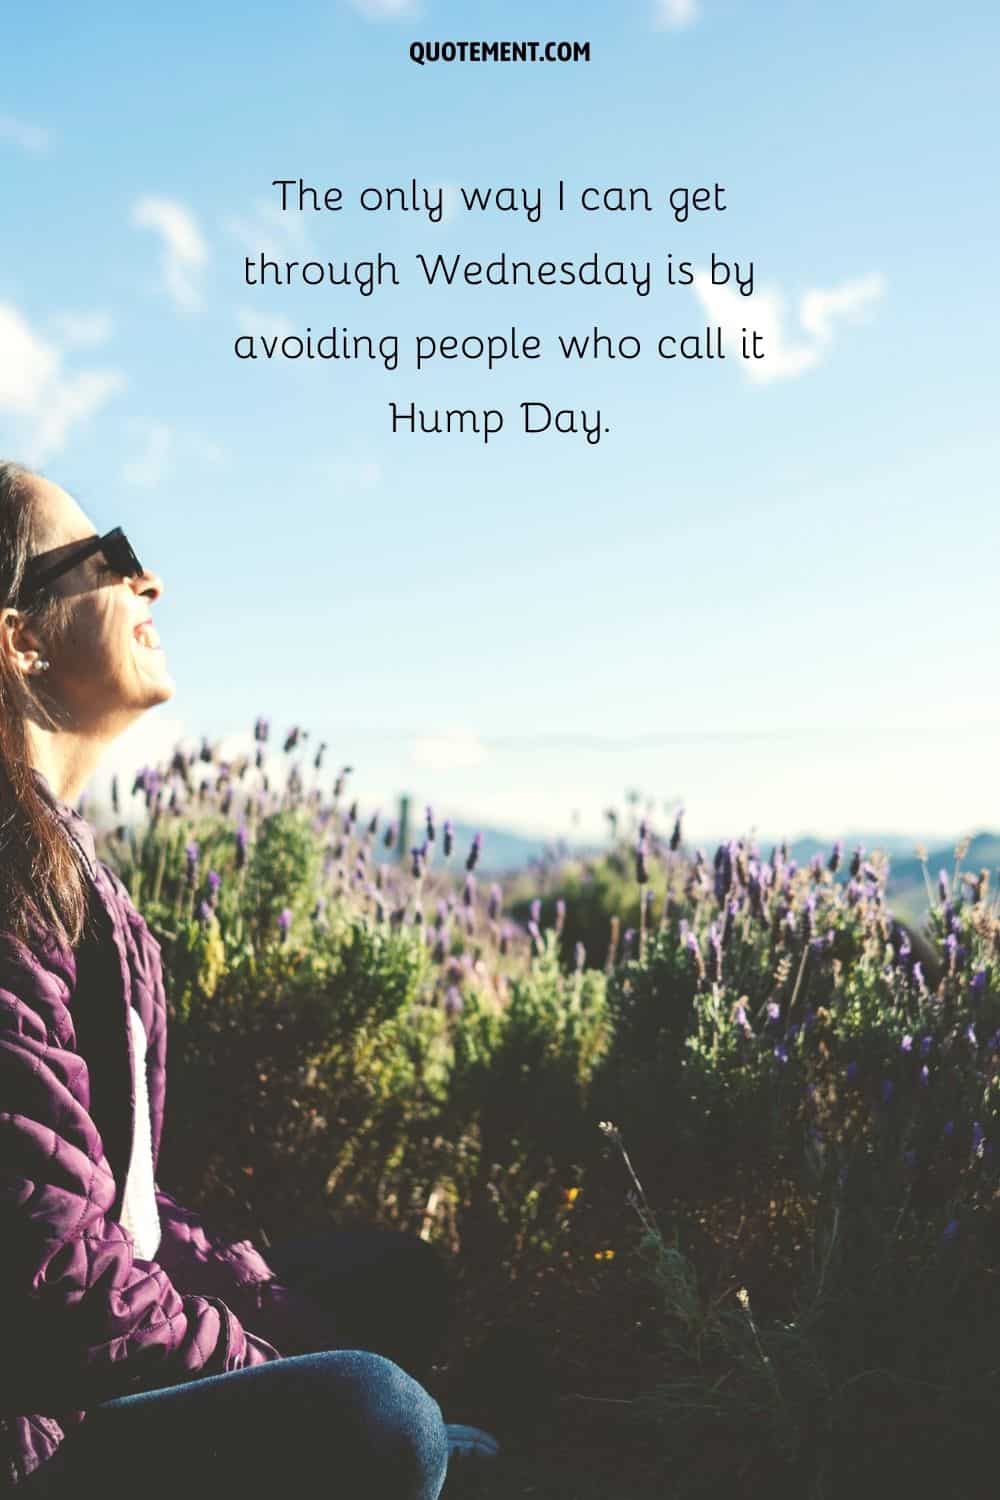 girl sitting and smiling amidst a lavender field representing a funny happy hump day quote